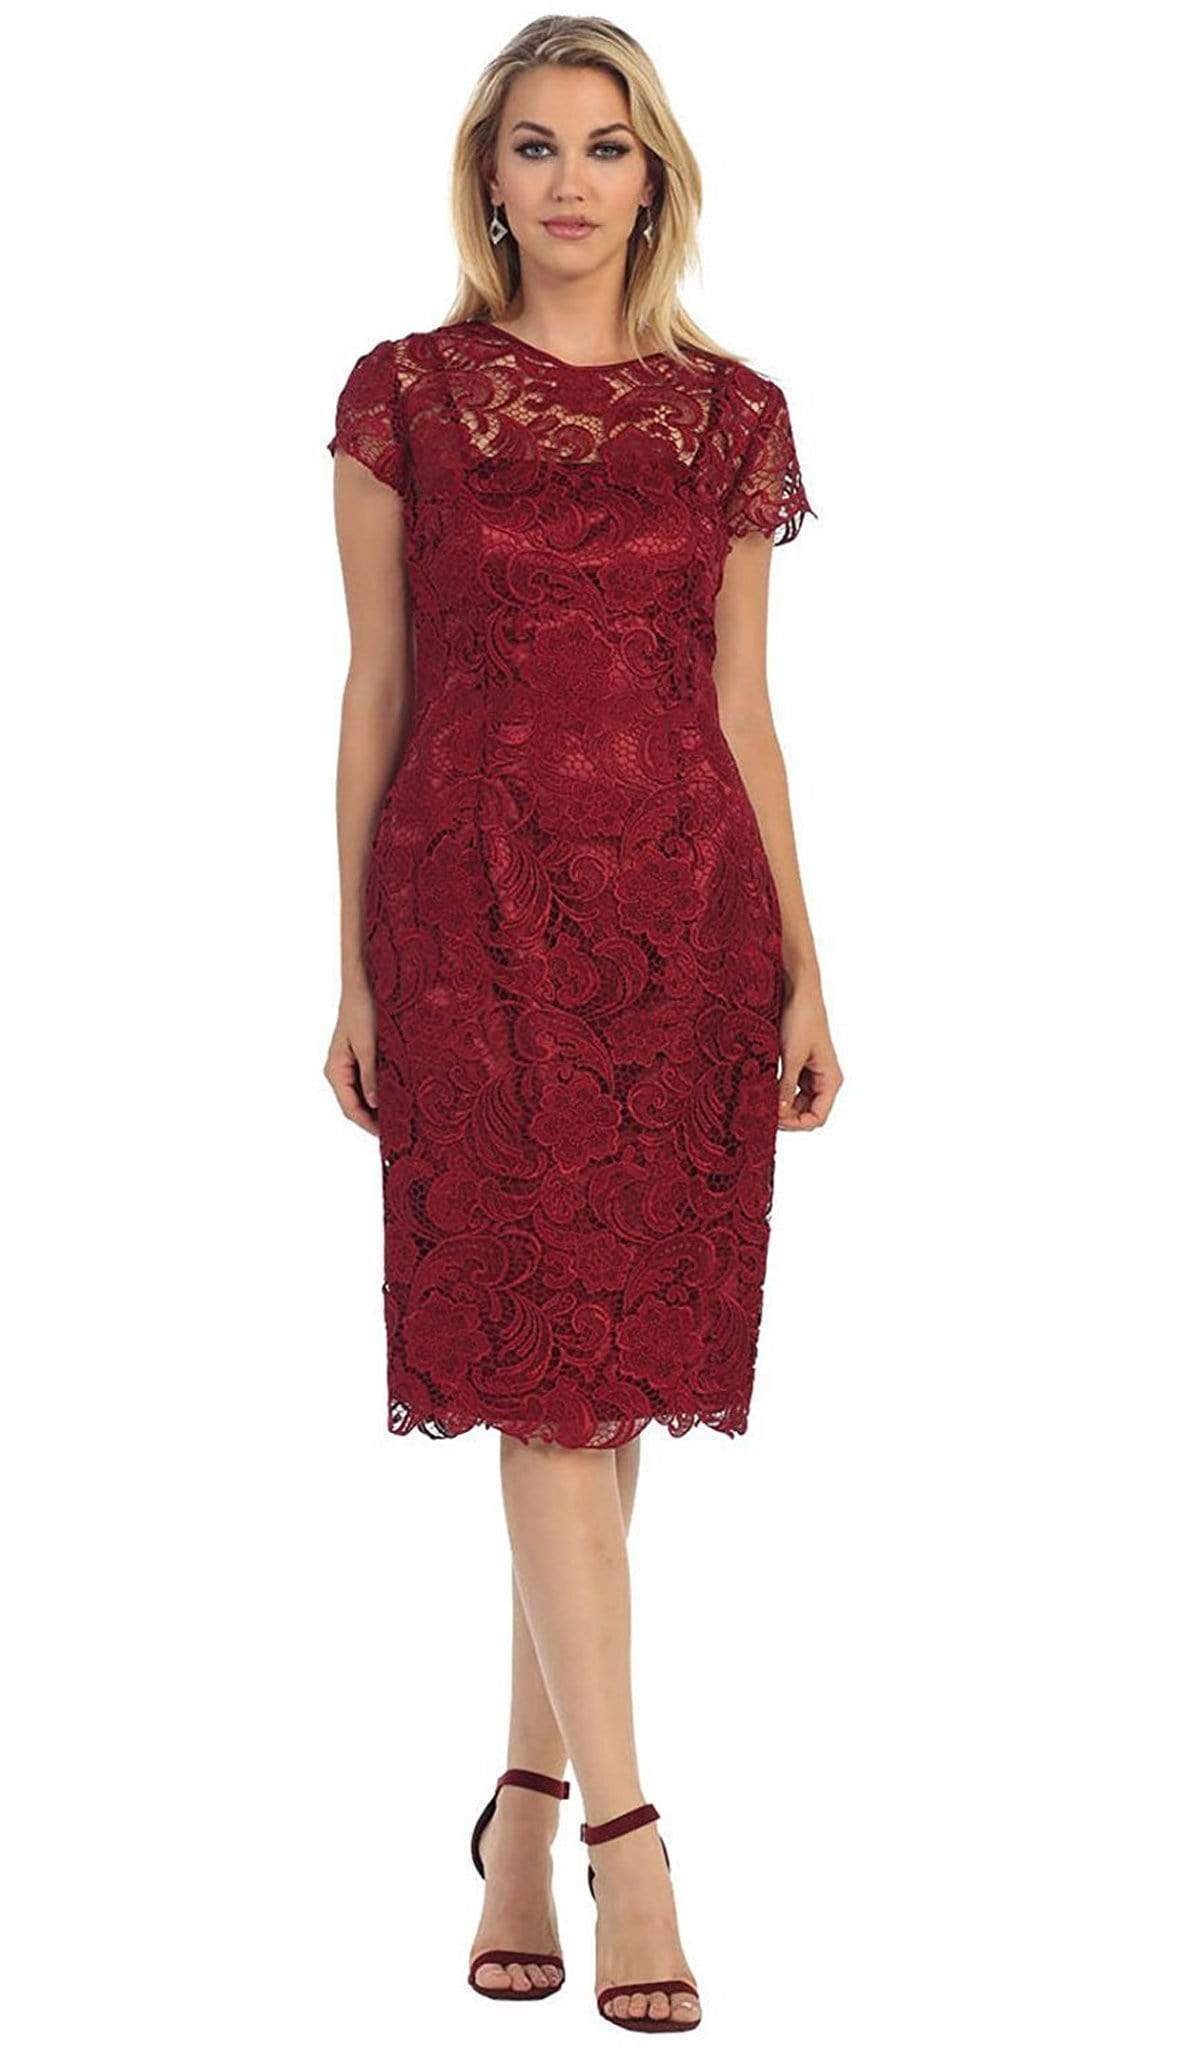 May Queen - Short Sleeve Sheer Scalloped Lace Formal Dress Special Occasion Dress M / Burgundy